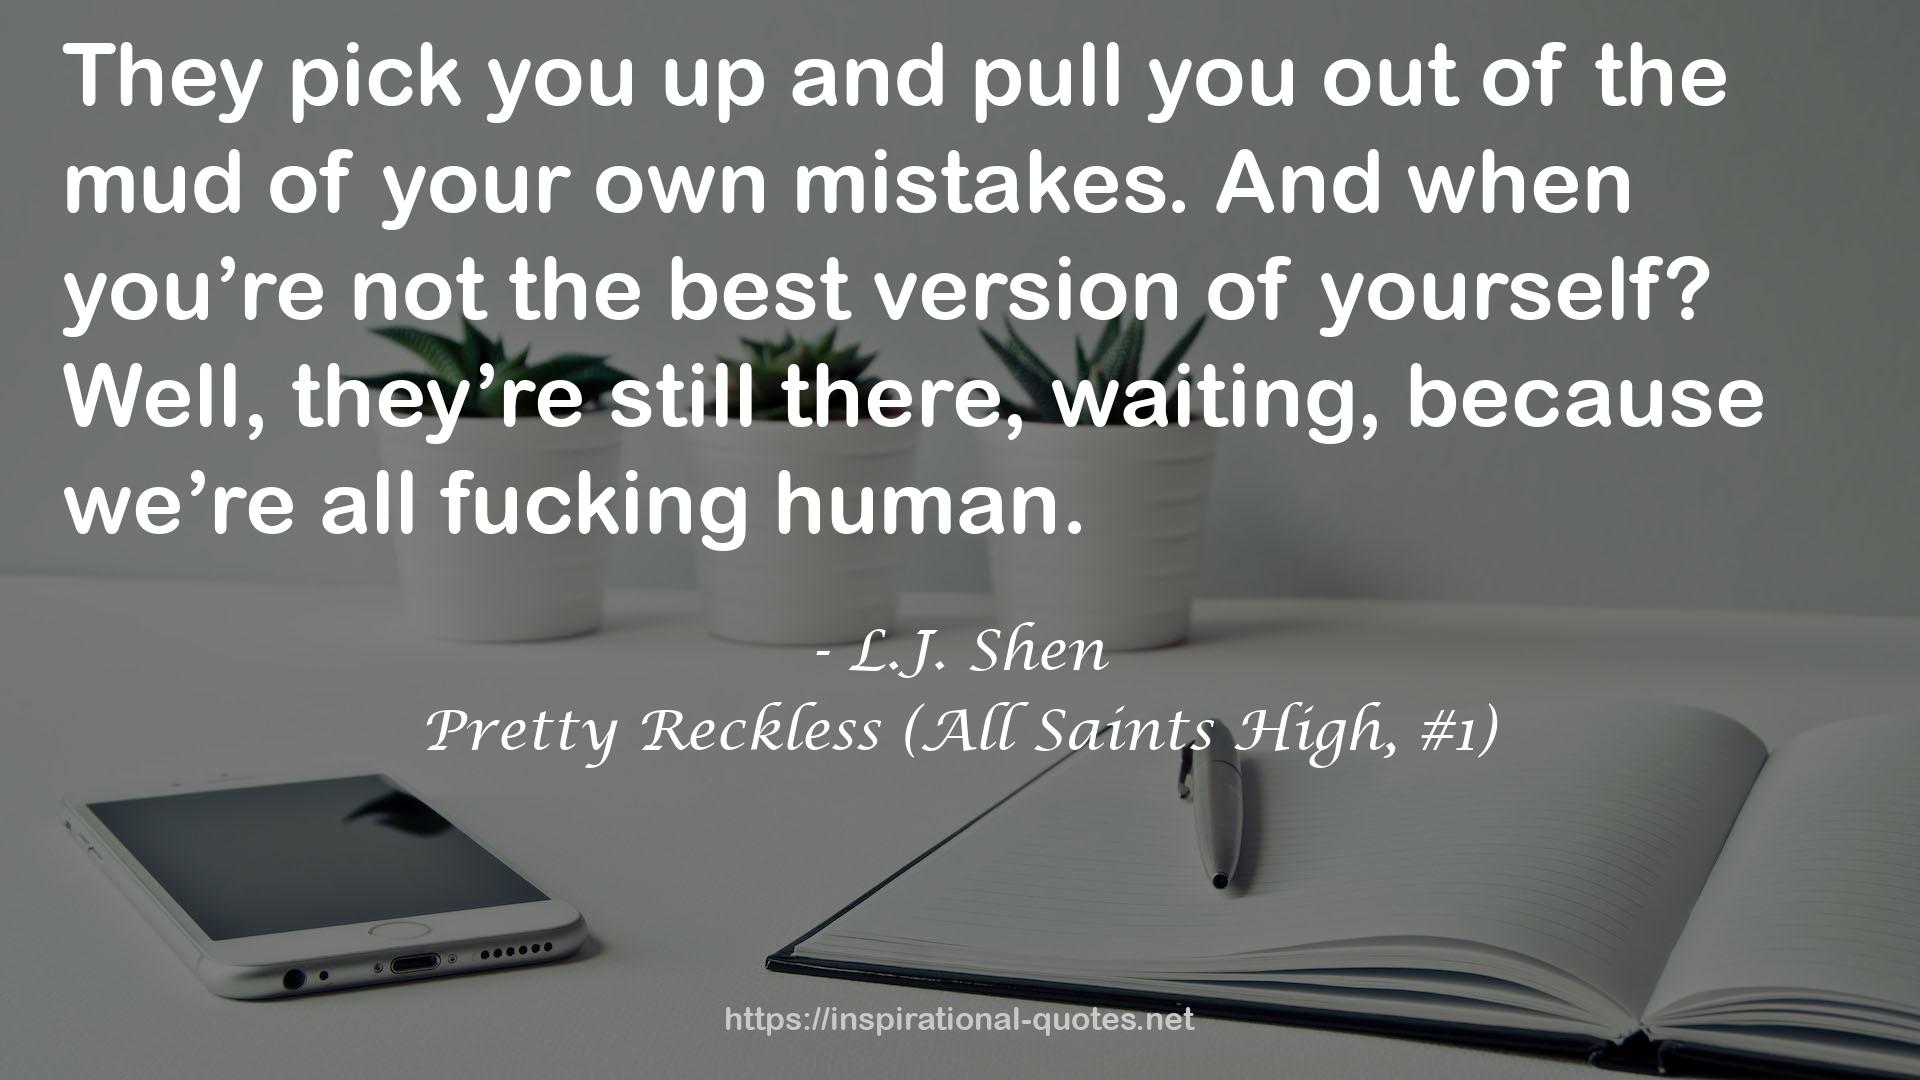 Pretty Reckless (All Saints High, #1) QUOTES